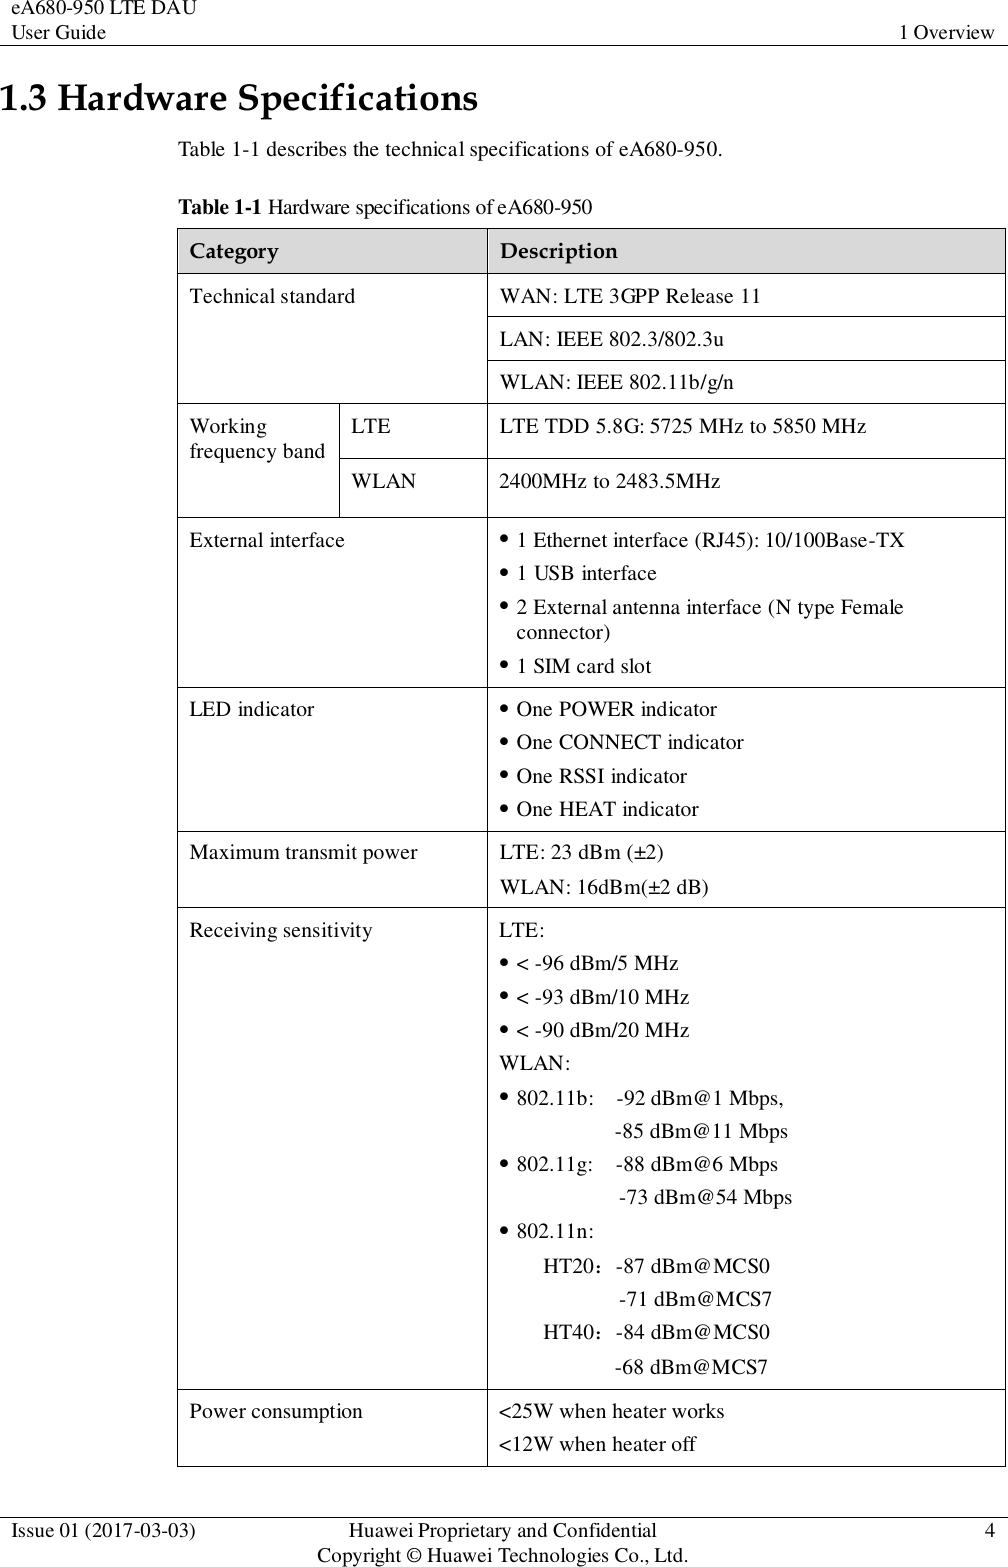 eA680-950 LTE DAU User Guide 1 Overview  Issue 01 (2017-03-03) Huawei Proprietary and Confidential                                     Copyright © Huawei Technologies Co., Ltd. 4  1.3 Hardware Specifications Table 1-1 describes the technical specifications of eA680-950. Table 1-1 Hardware specifications of eA680-950 Category Description Technical standard WAN: LTE 3GPP Release 11 LAN: IEEE 802.3/802.3u WLAN: IEEE 802.11b/g/n Working frequency band LTE LTE TDD 5.8G: 5725 MHz to 5850 MHz WLAN 2400MHz to 2483.5MHz External interface  1 Ethernet interface (RJ45): 10/100Base-TX  1 USB interface  2 External antenna interface (N type Female connector)    1 SIM card slot LED indicator  One POWER indicator  One CONNECT indicator  One RSSI indicator  One HEAT indicator Maximum transmit power LTE: 23 dBm (±2) WLAN: 16dBm(±2 dB) Receiving sensitivity LTE:  &lt; -96 dBm/5 MHz  &lt; -93 dBm/10 MHz  &lt; -90 dBm/20 MHz   WLAN:  802.11b:  -92 dBm@1 Mbps, -85 dBm@11 Mbps  802.11g:  -88 dBm@6 Mbps -73 dBm@54 Mbps    802.11n:     HT20：-87 dBm@MCS0 -71 dBm@MCS7 HT40：-84 dBm@MCS0 -68 dBm@MCS7 Power consumption &lt;25W when heater works &lt;12W when heater off 